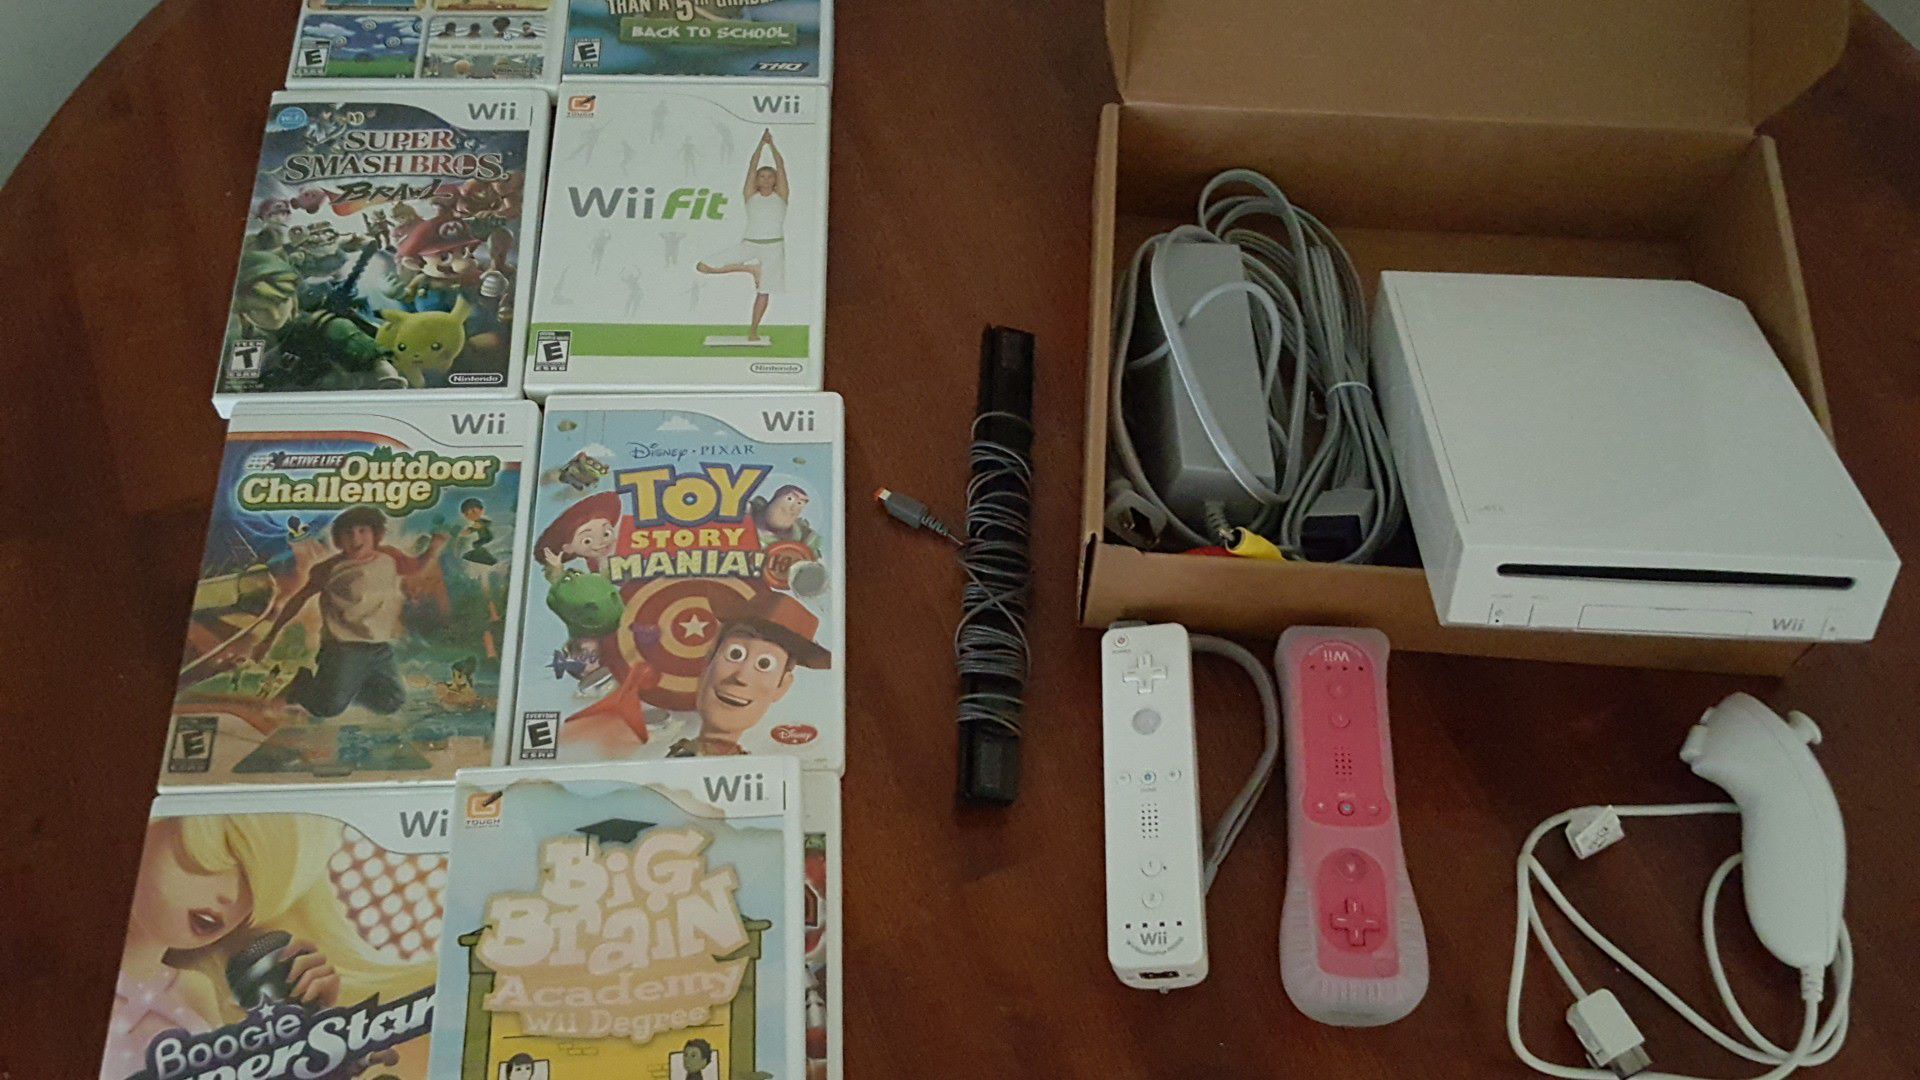 NINTENDO WII WITH ACCESSORIES AND 9 GAMES ALMOST BRAND NEW SELLING FOR $130 OBO